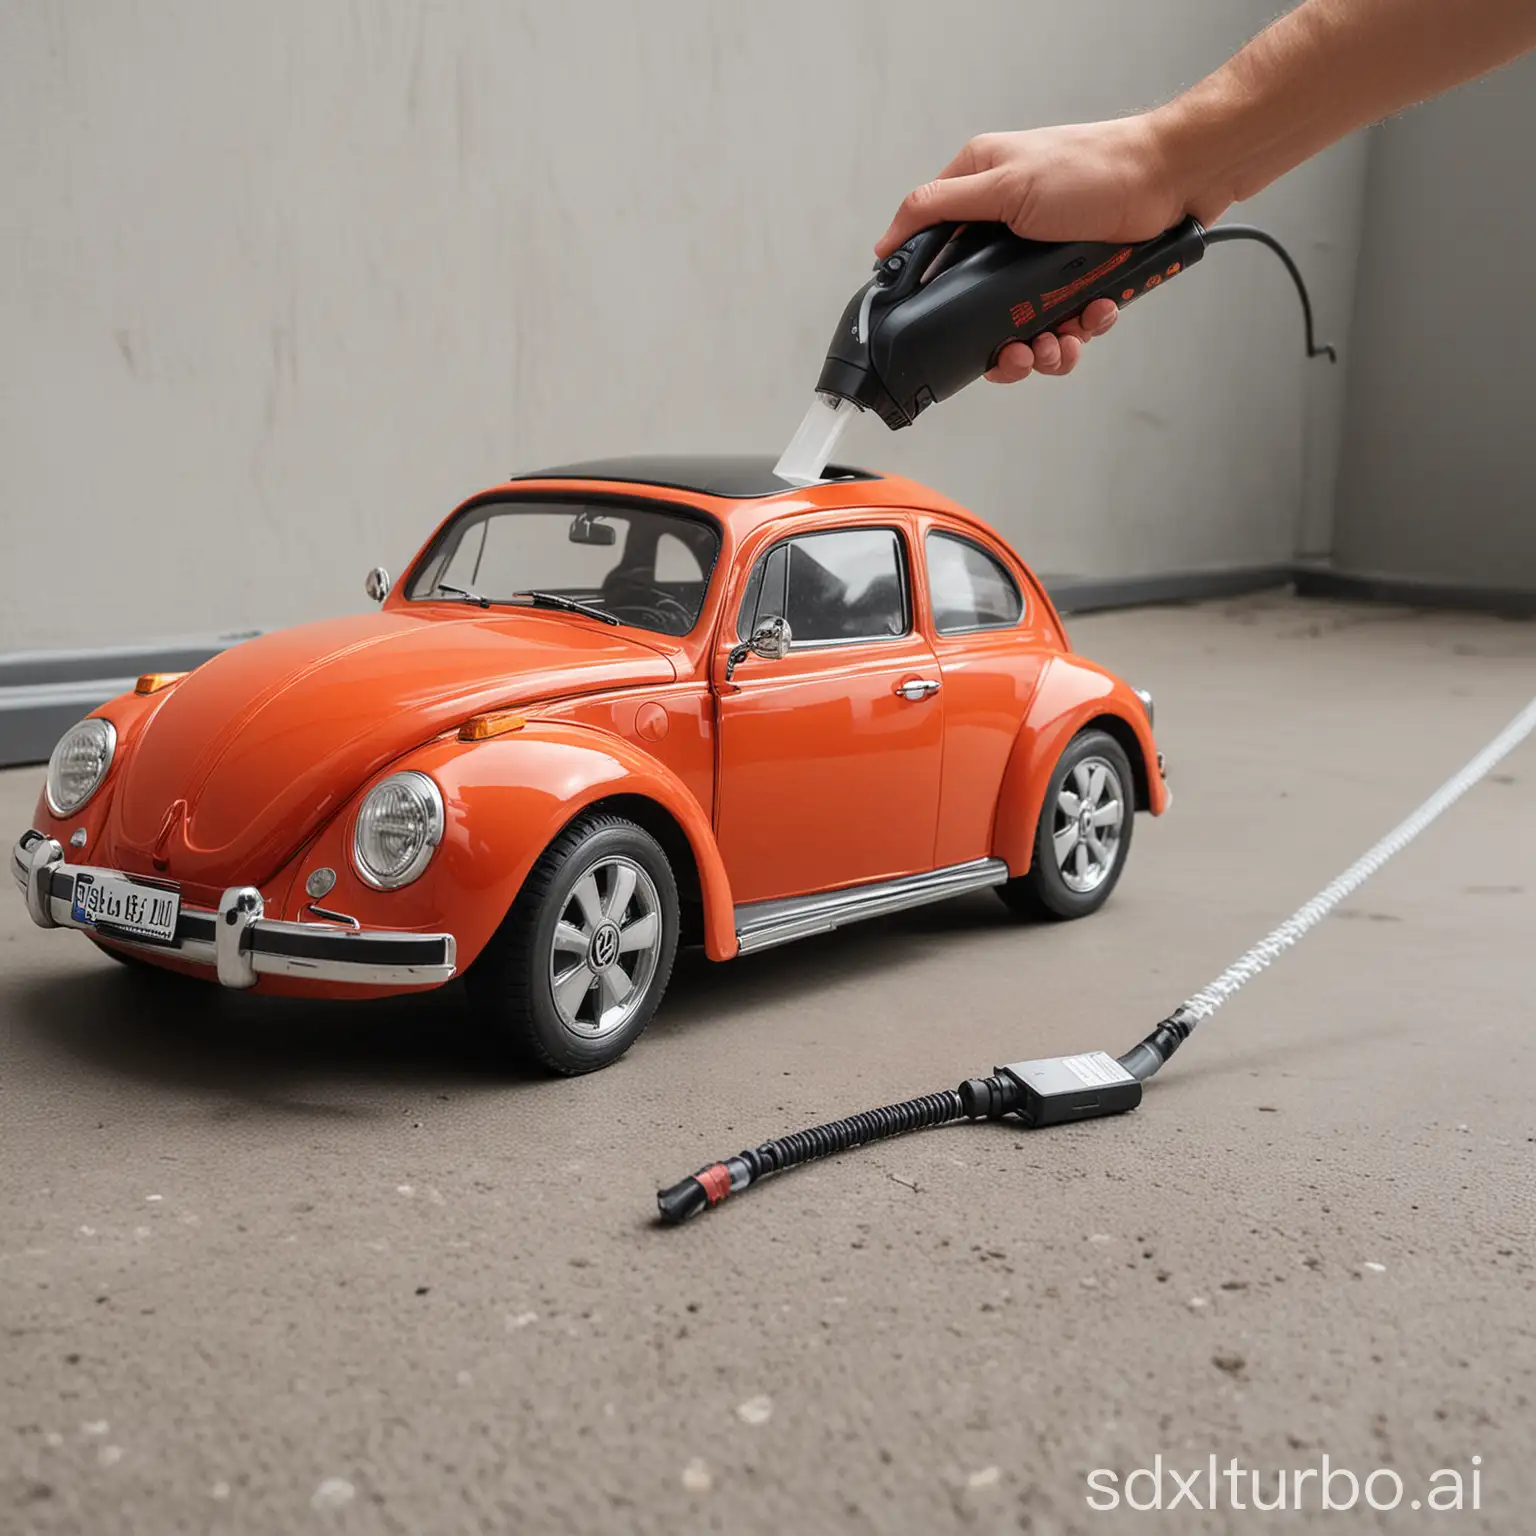 Transforming the front of the Volkswagen Beetle into a small handheld car vacuum cleaner, wireless